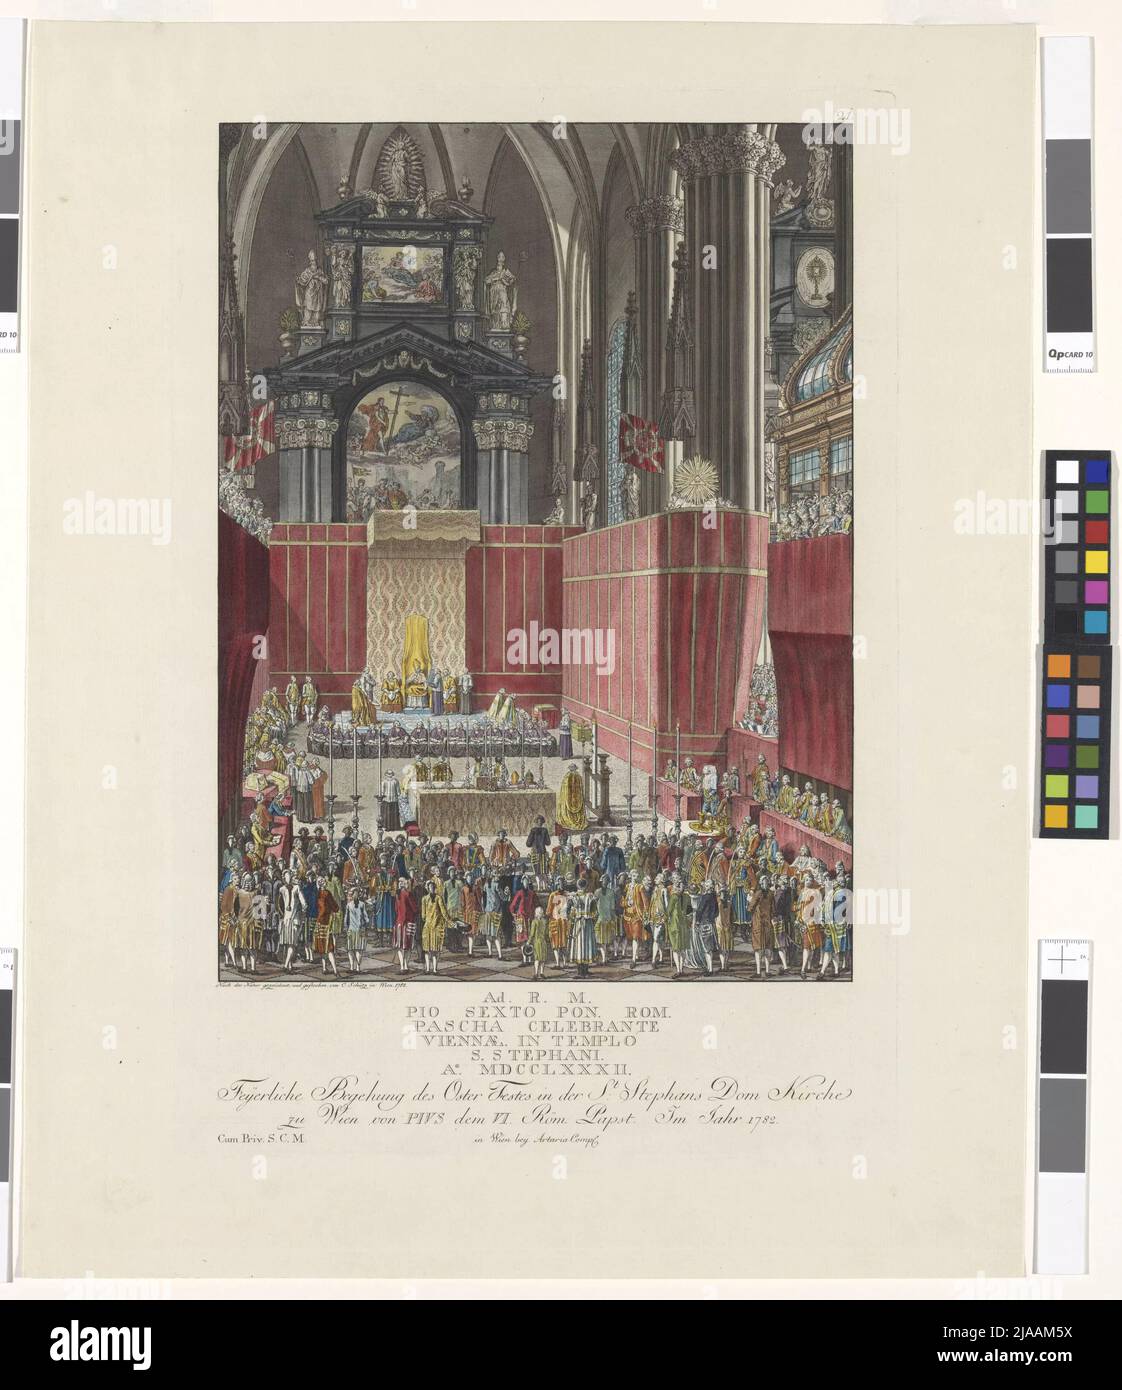 Feyer inspection of the Easter festival in the St. Stephan Cathedral of the  Church of Vienna by Pius the VI Röm. Pope "(single budget). Carl Schütz  (1745-1800), Artist, Artaria & Co. Verlag,